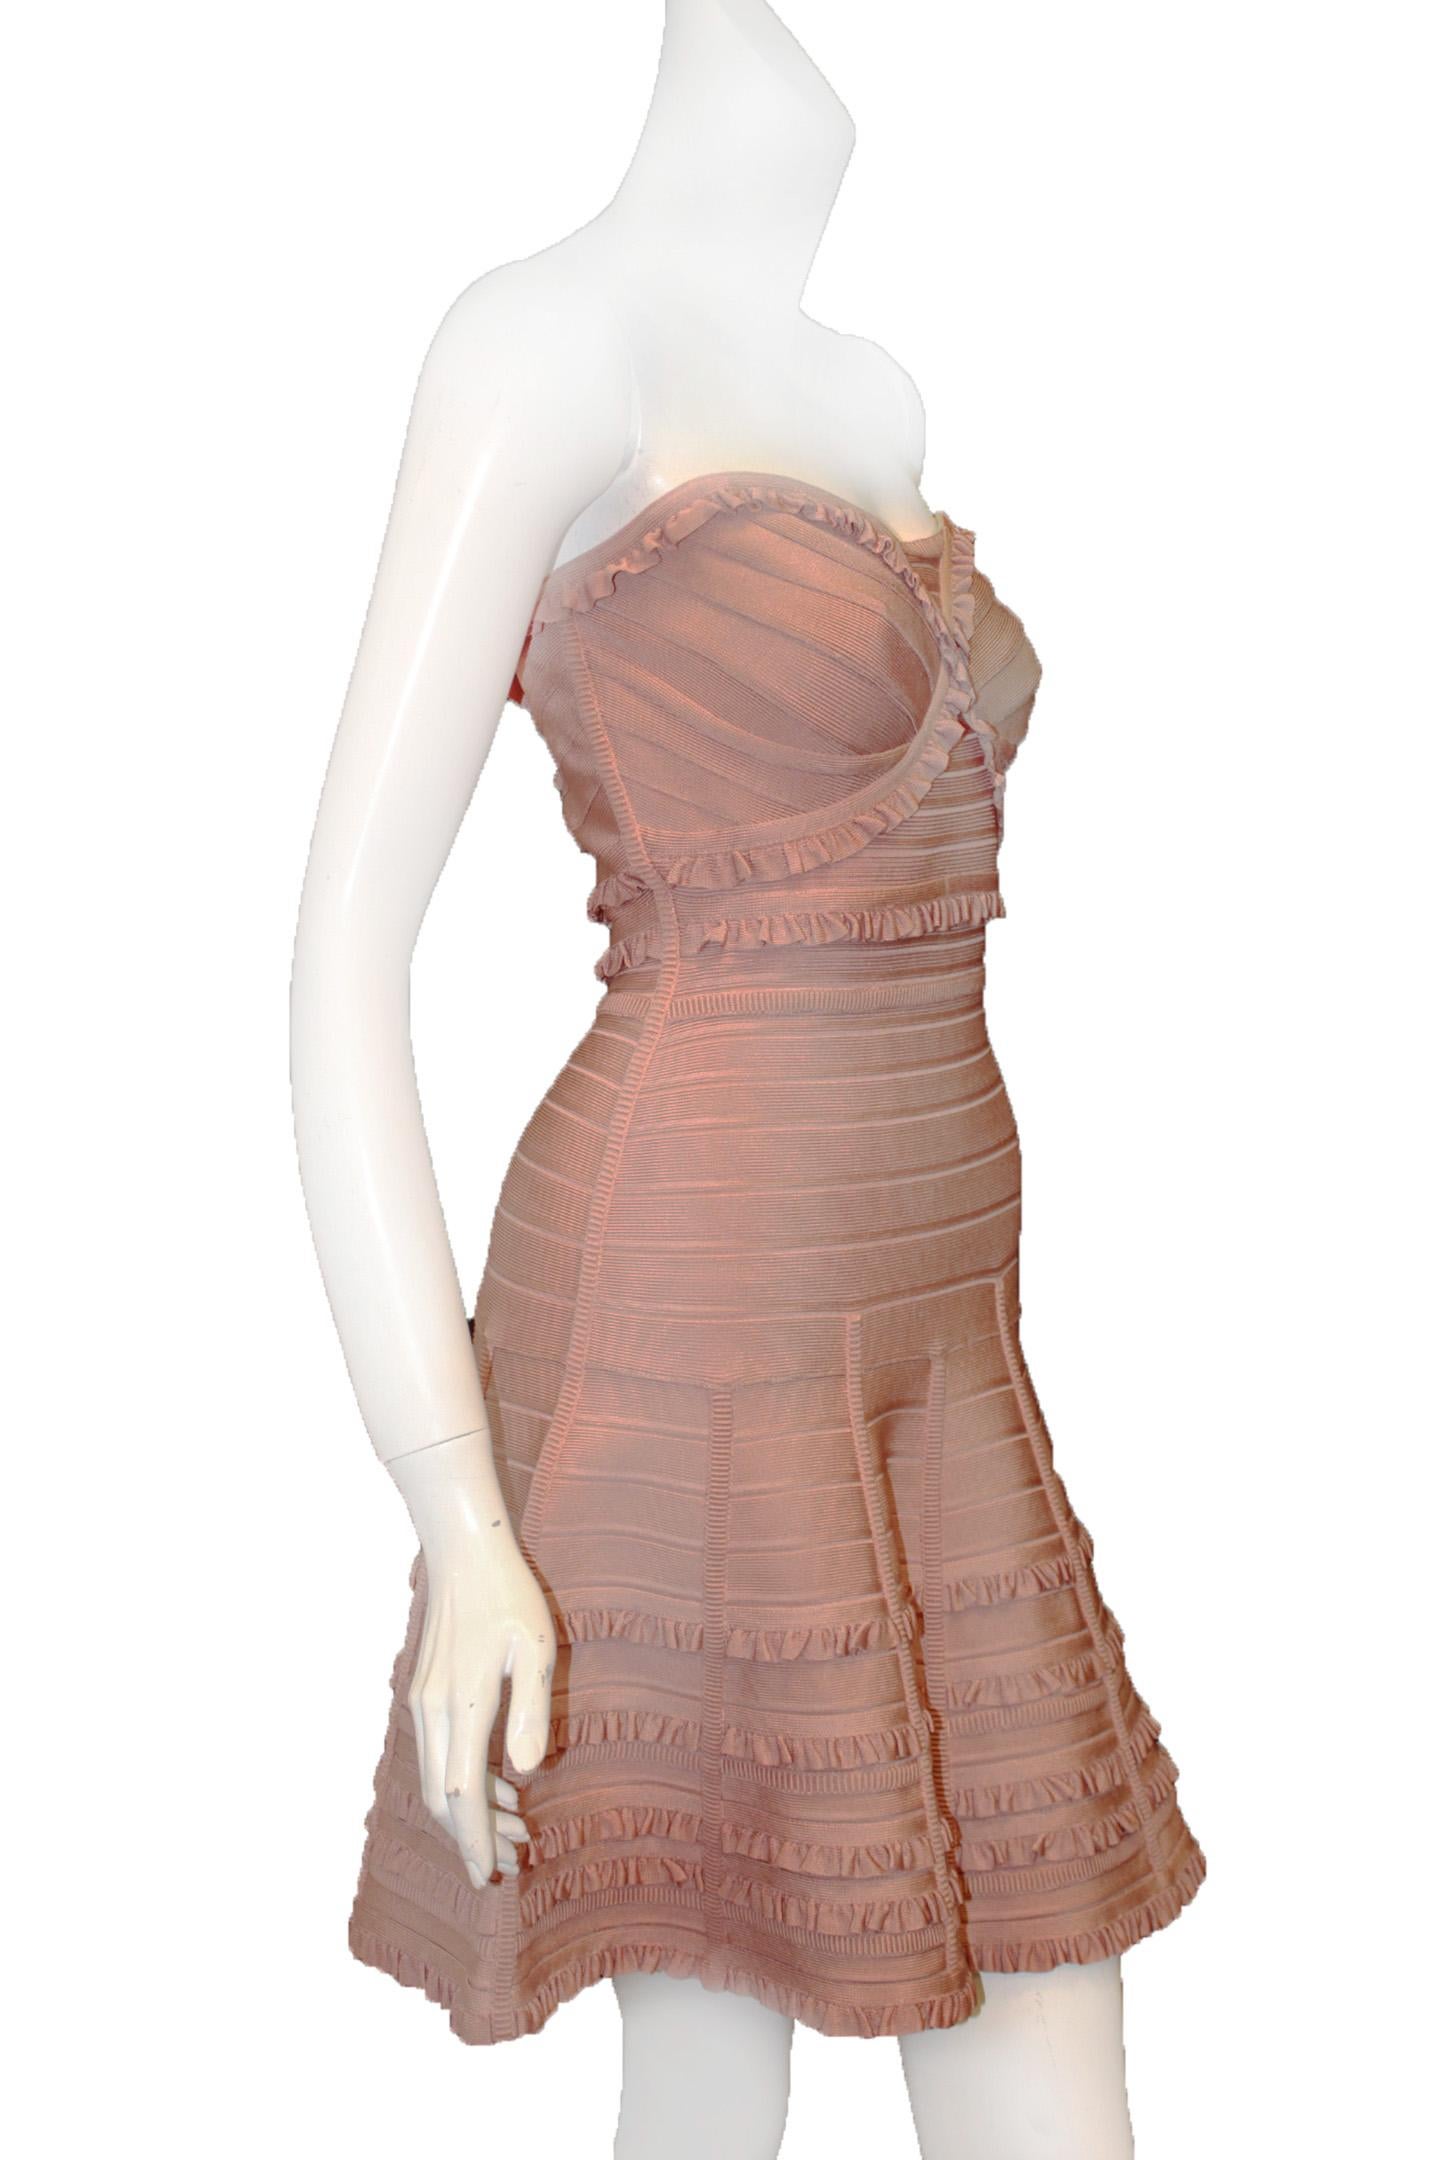 Herve Leger pink strapless dress to bedazzle the crowd with a stunning style statement in this classic Akari mini dress.  Fashioned in a strapless silhouette with the signature bandage construction, the dress has a fitted bodice with a sweetheart